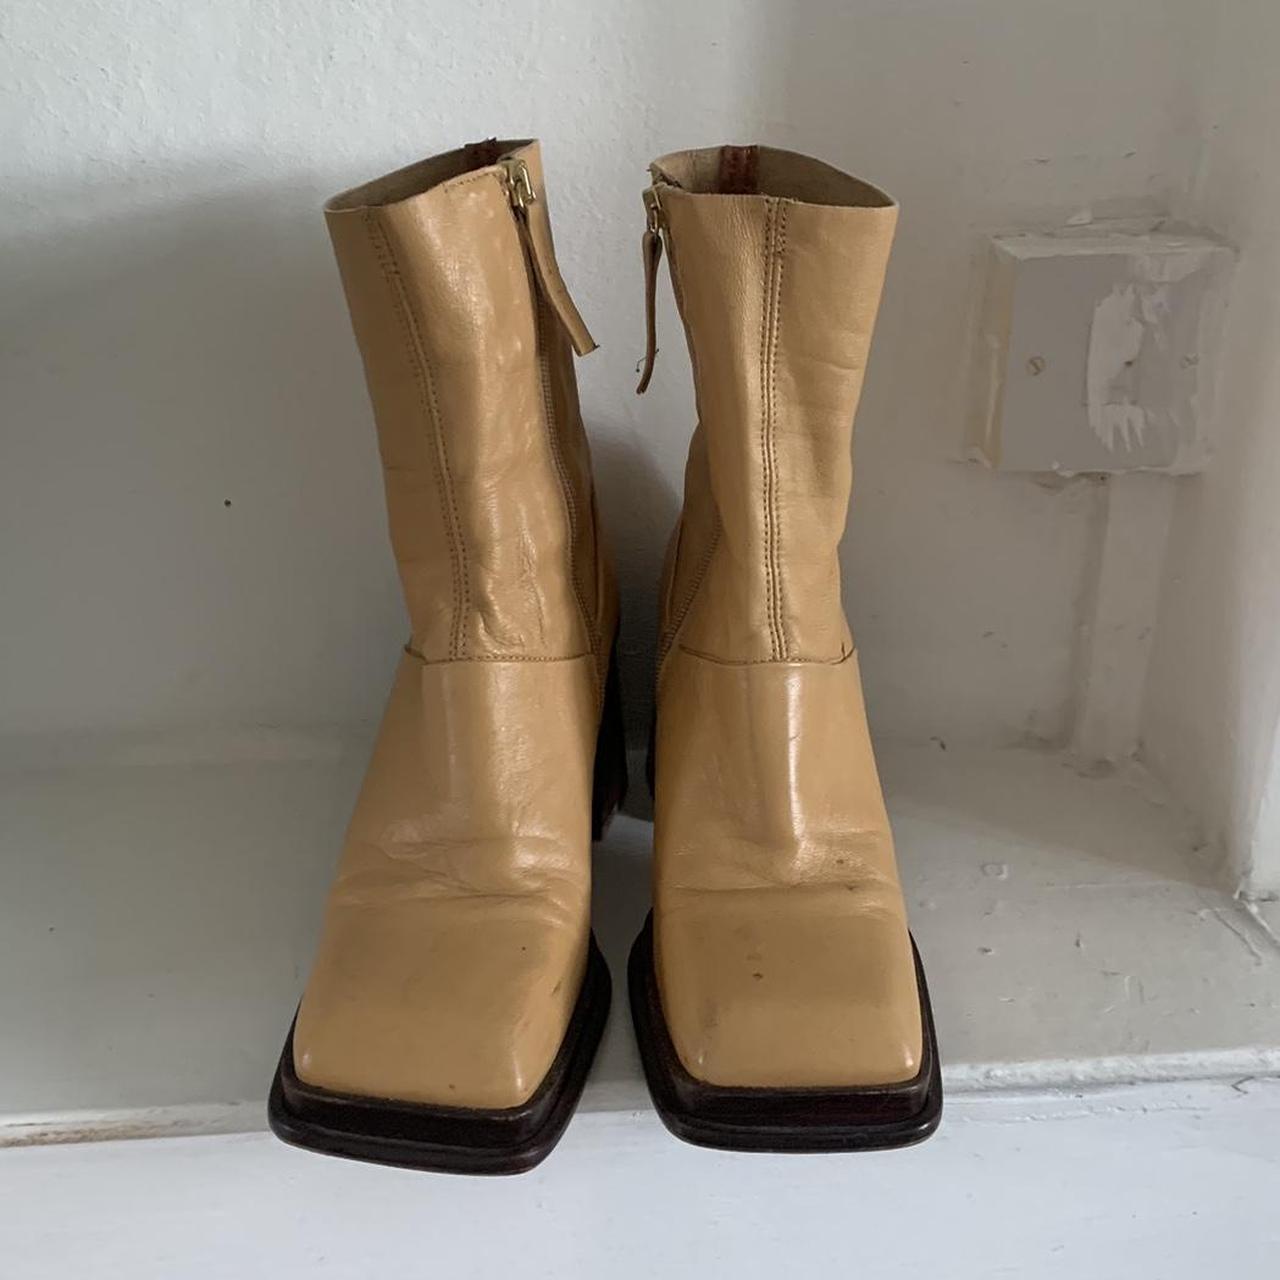 really cute ‘camel yellow’ boots square toe very... - Depop